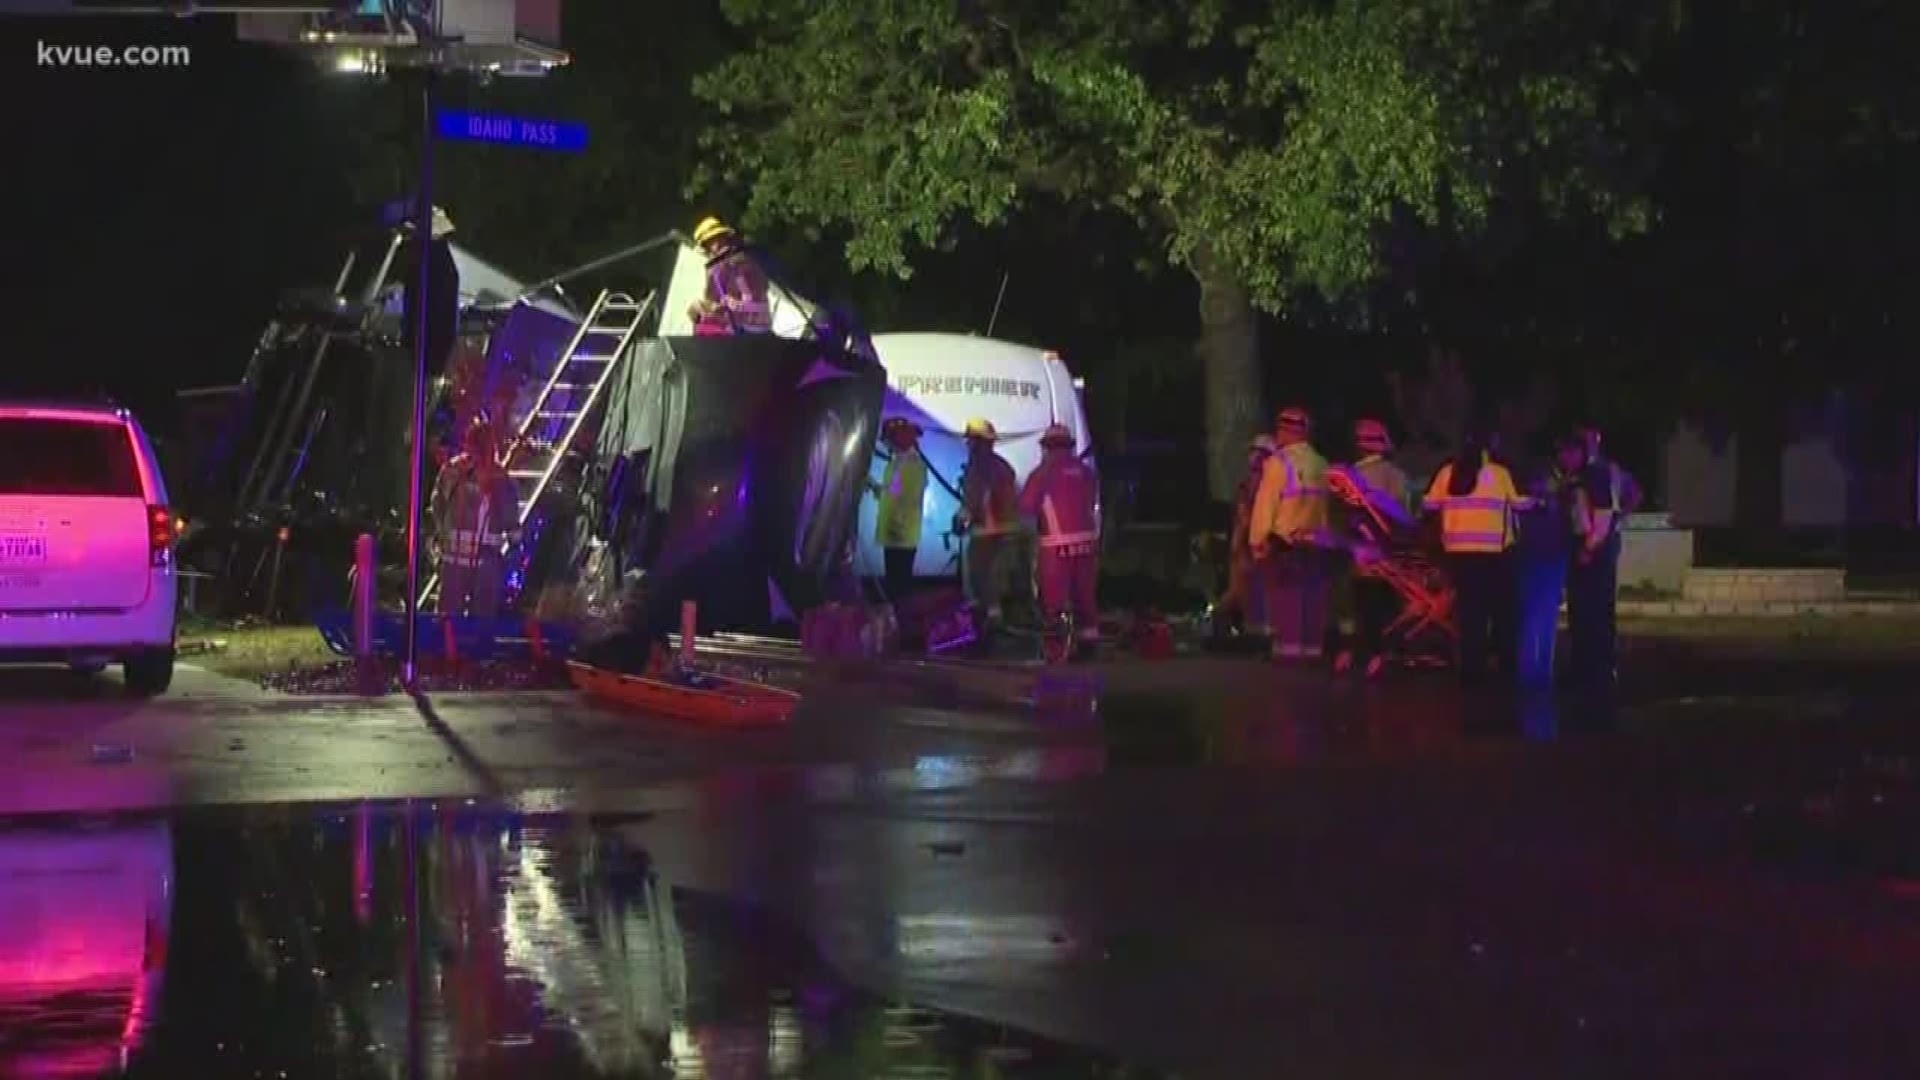 Storm believed to have tipped over mobile trailer in Austin